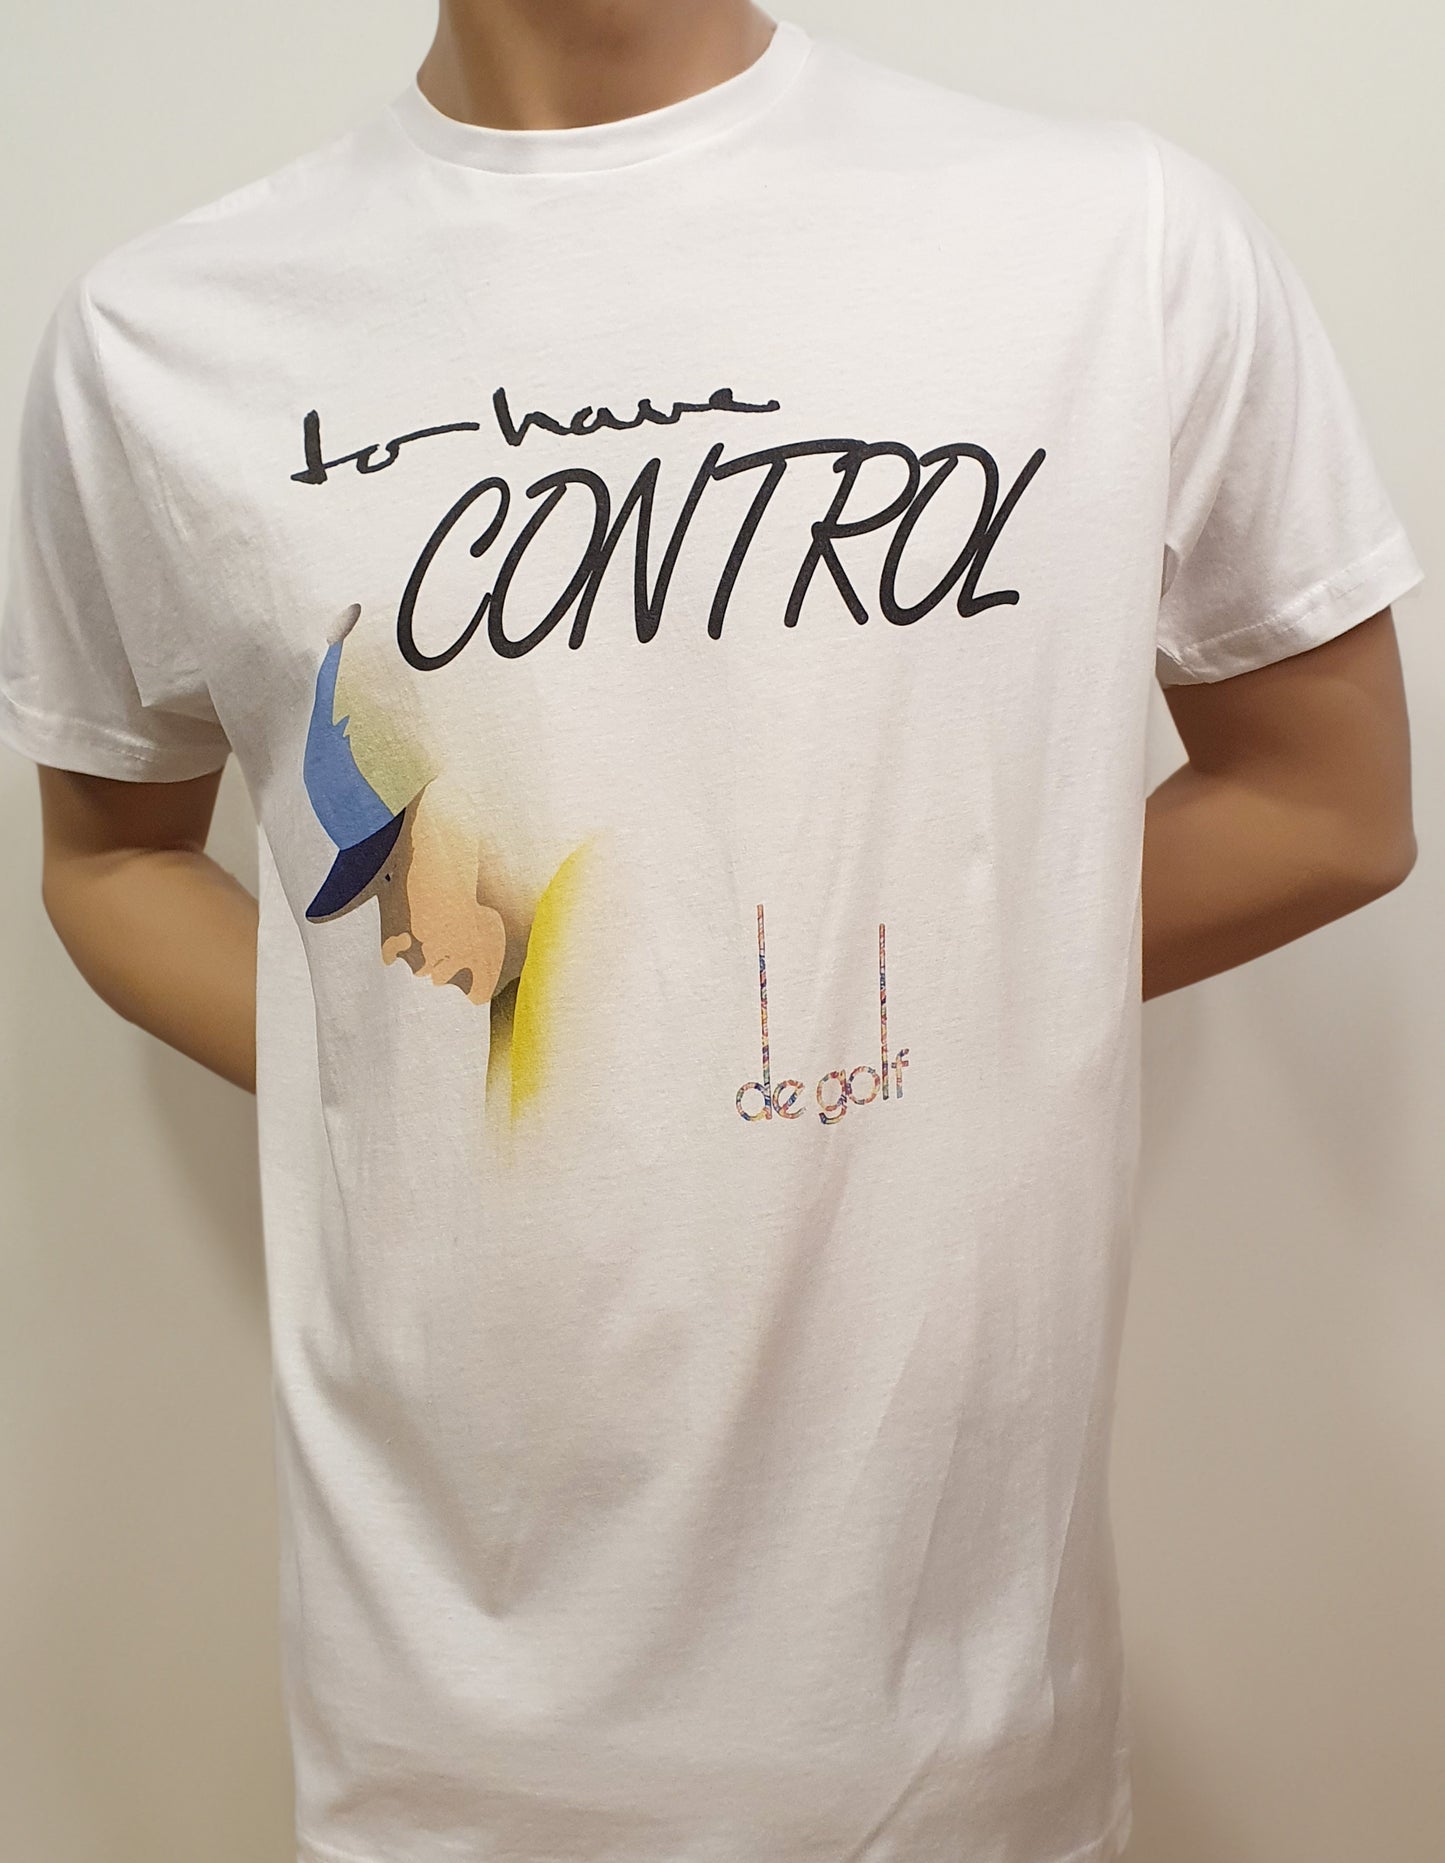 To have control - T - shirt